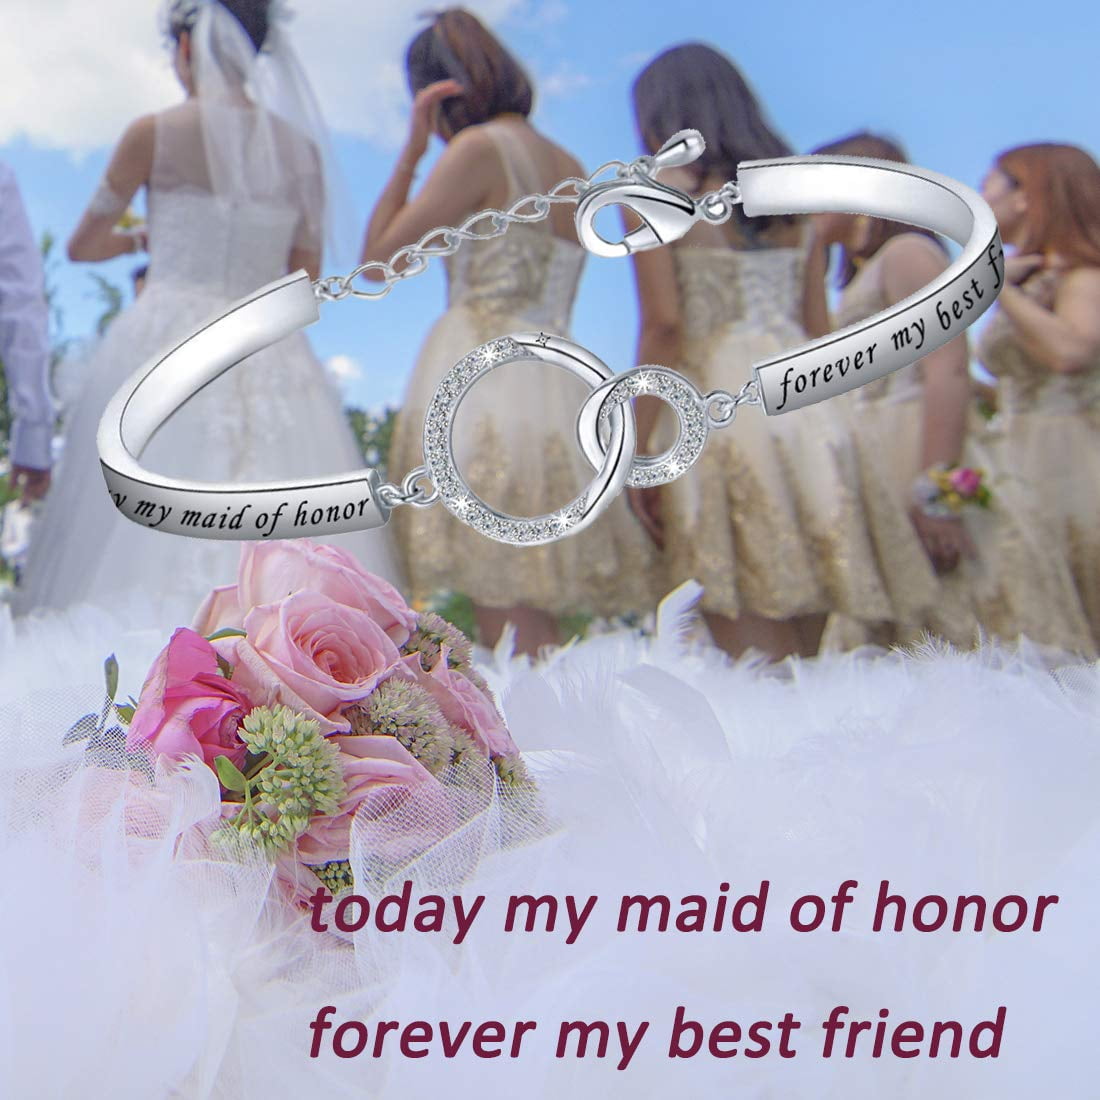 Gift for Bride From Maid of Honor, Sister, Bridesmaid, Mom, Best Friend, on Her  Wedding Day 